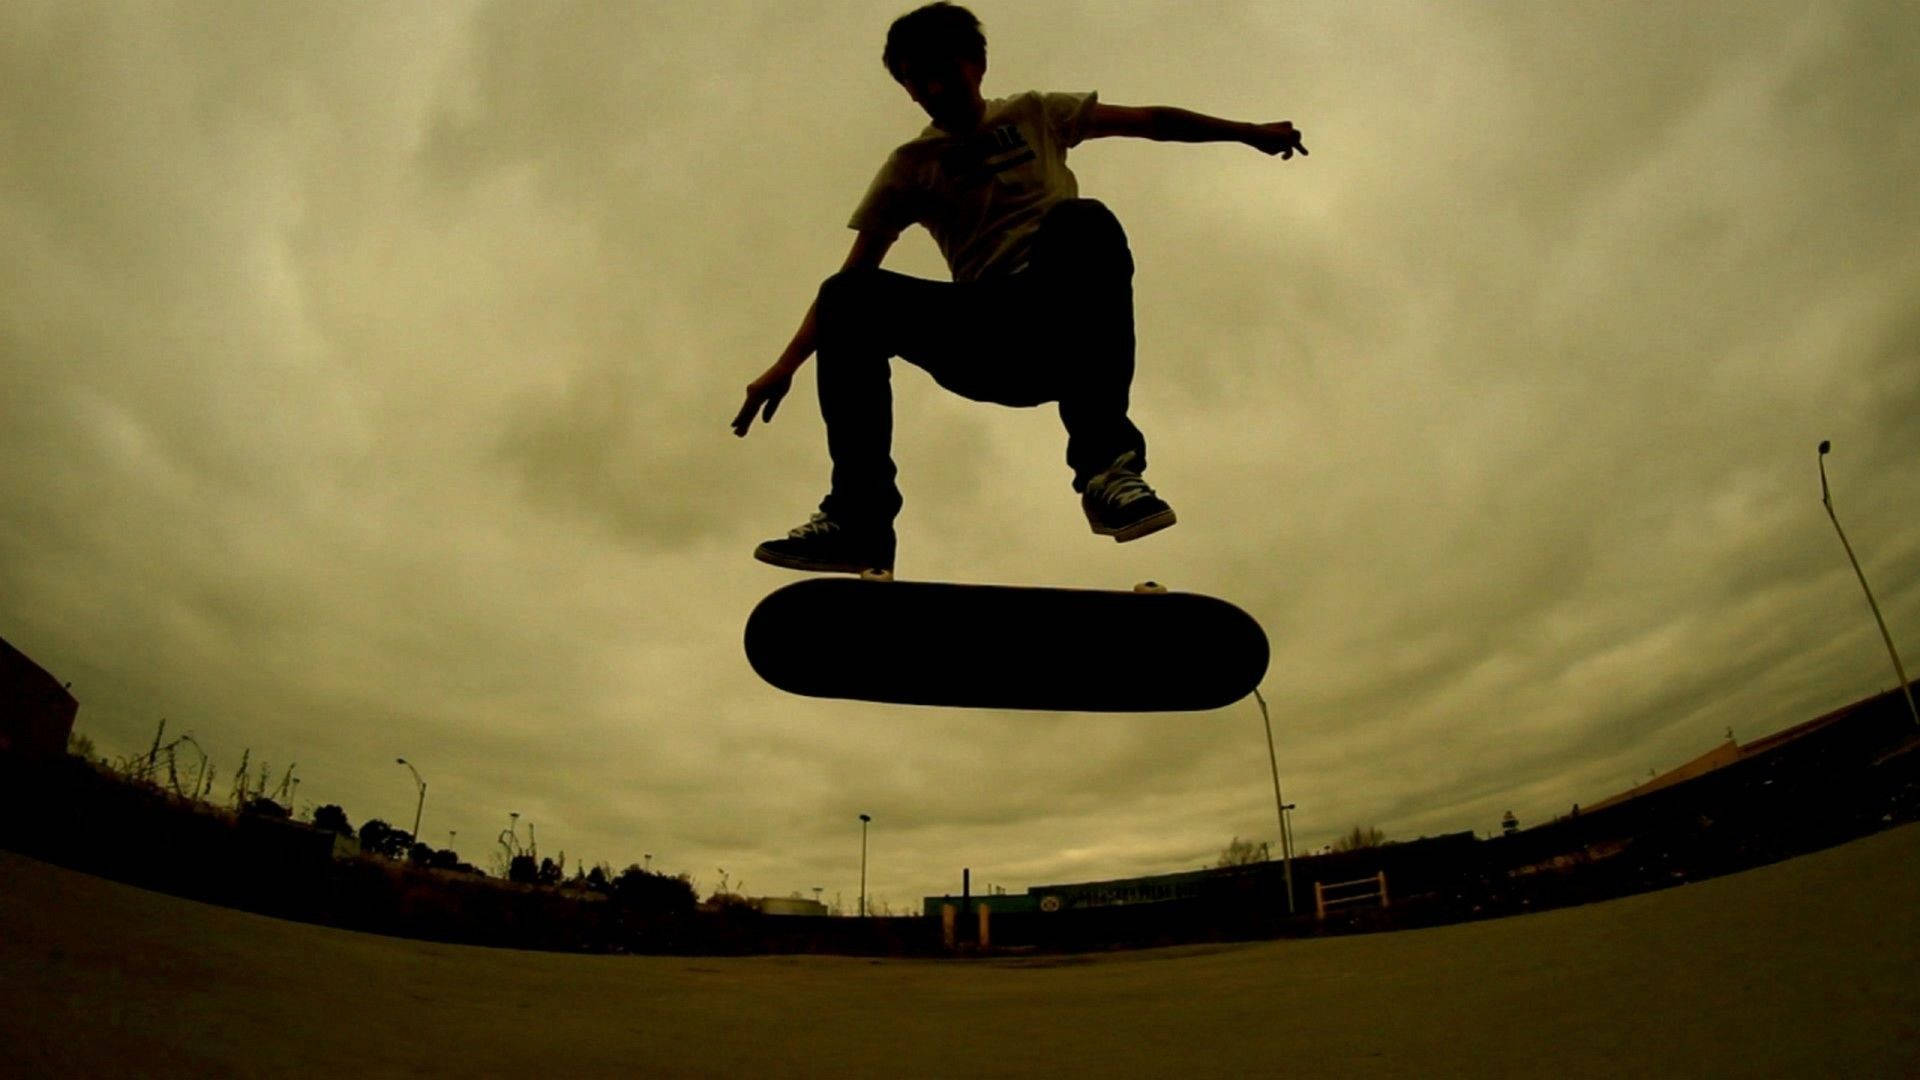 Skateboard Jump Silhouette Wide Angle Background